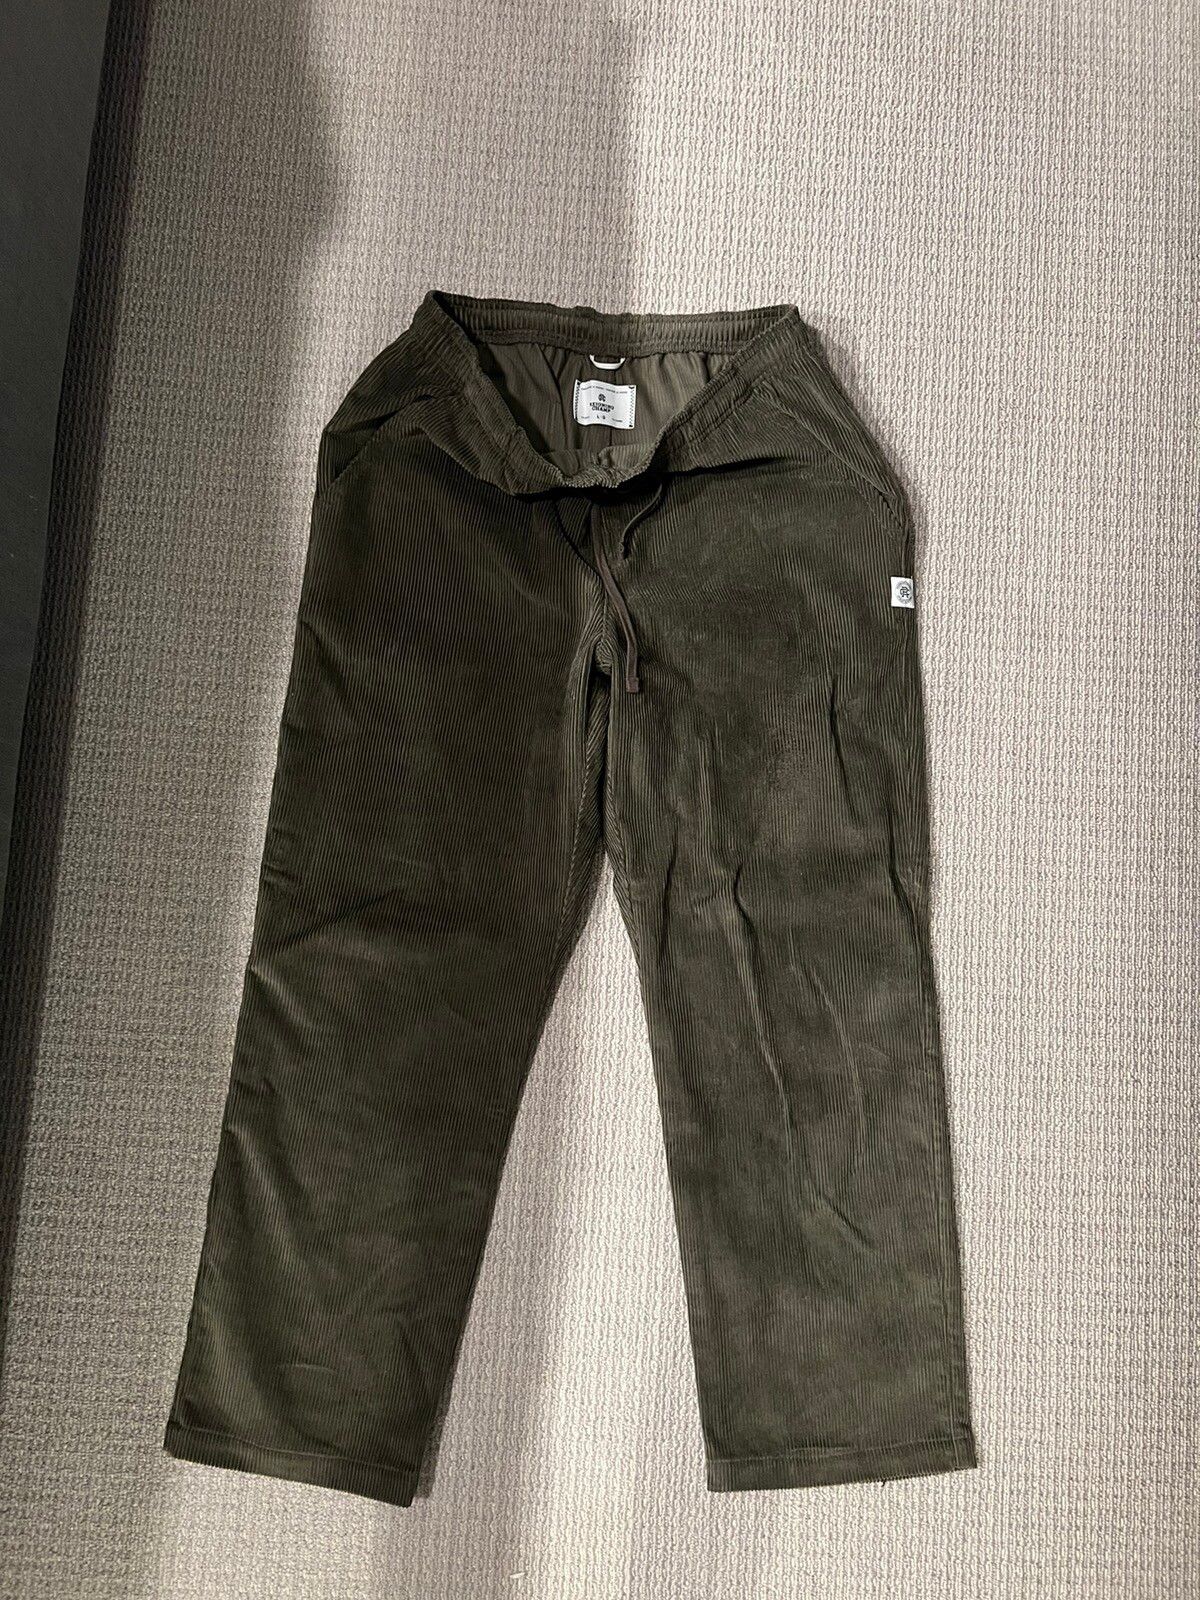 Reigning Champ Corduroy Pants | Grailed